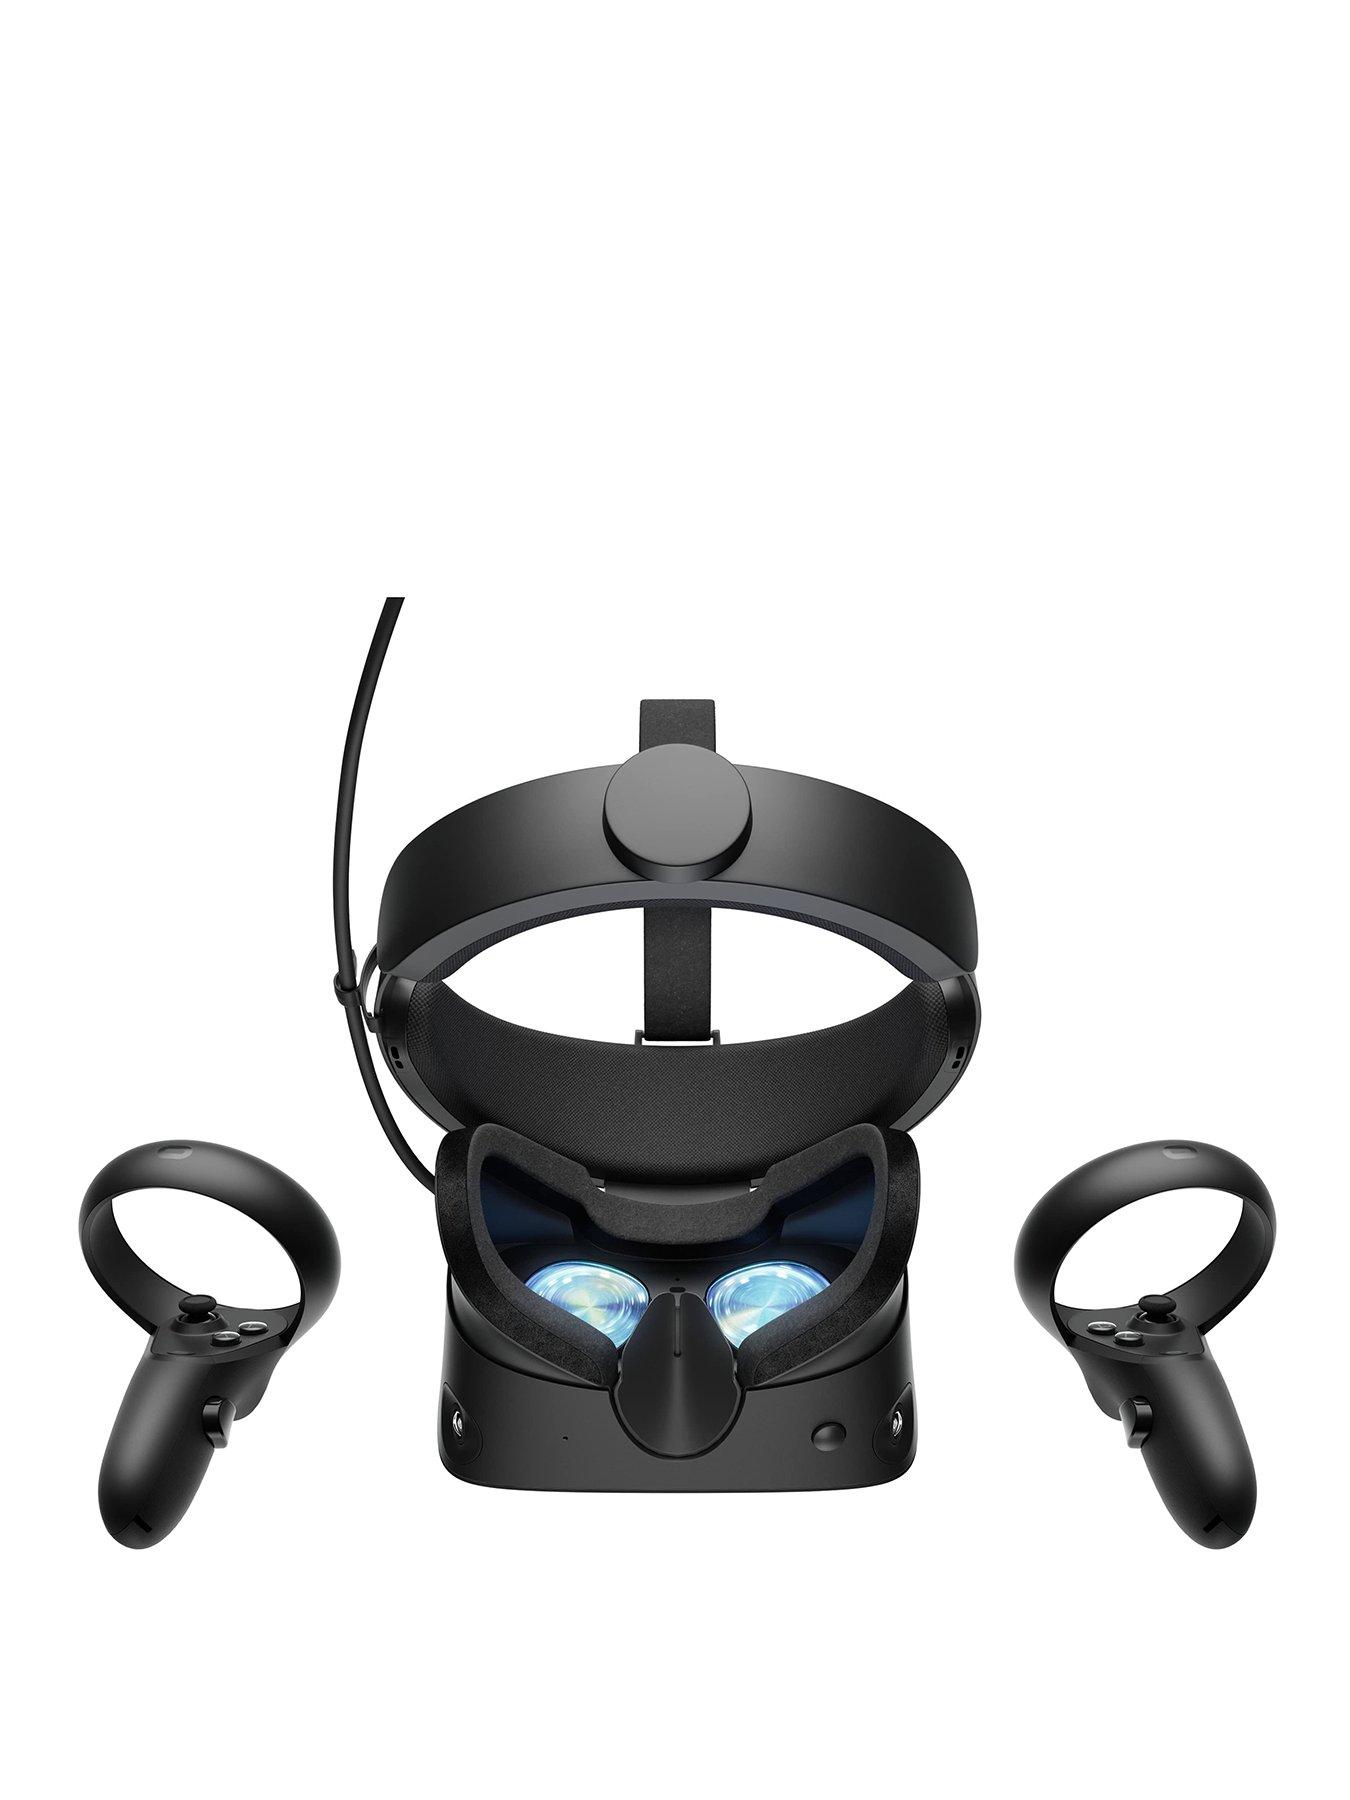 Alleged Record scramble Oculus Rift Very, Buy Now, Hotsell, 56% OFF, www.chocomuseo.com